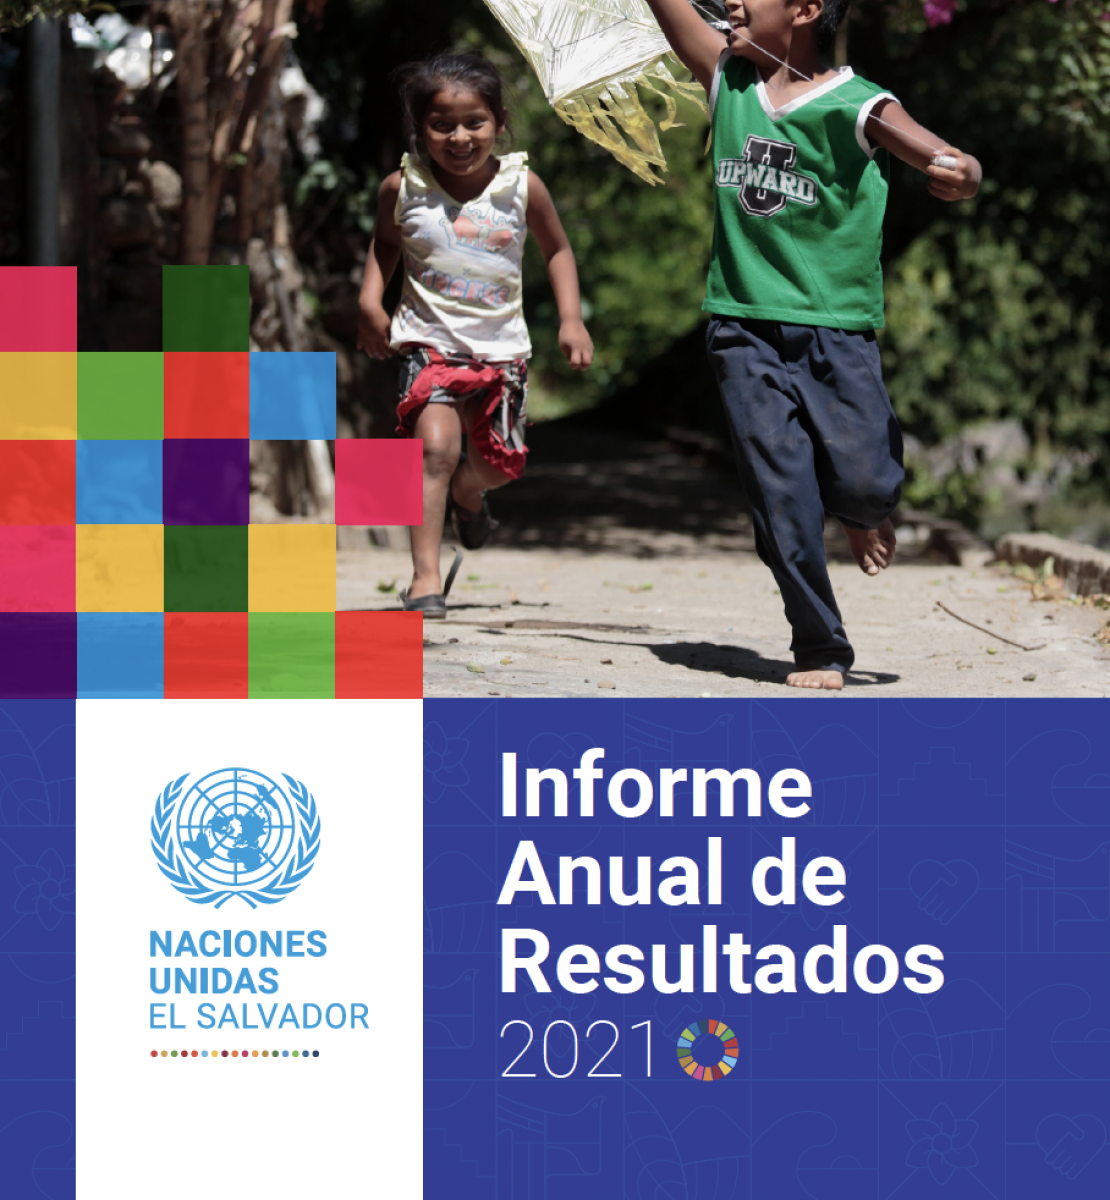 El Salvador Country Results Report: picture of the cover